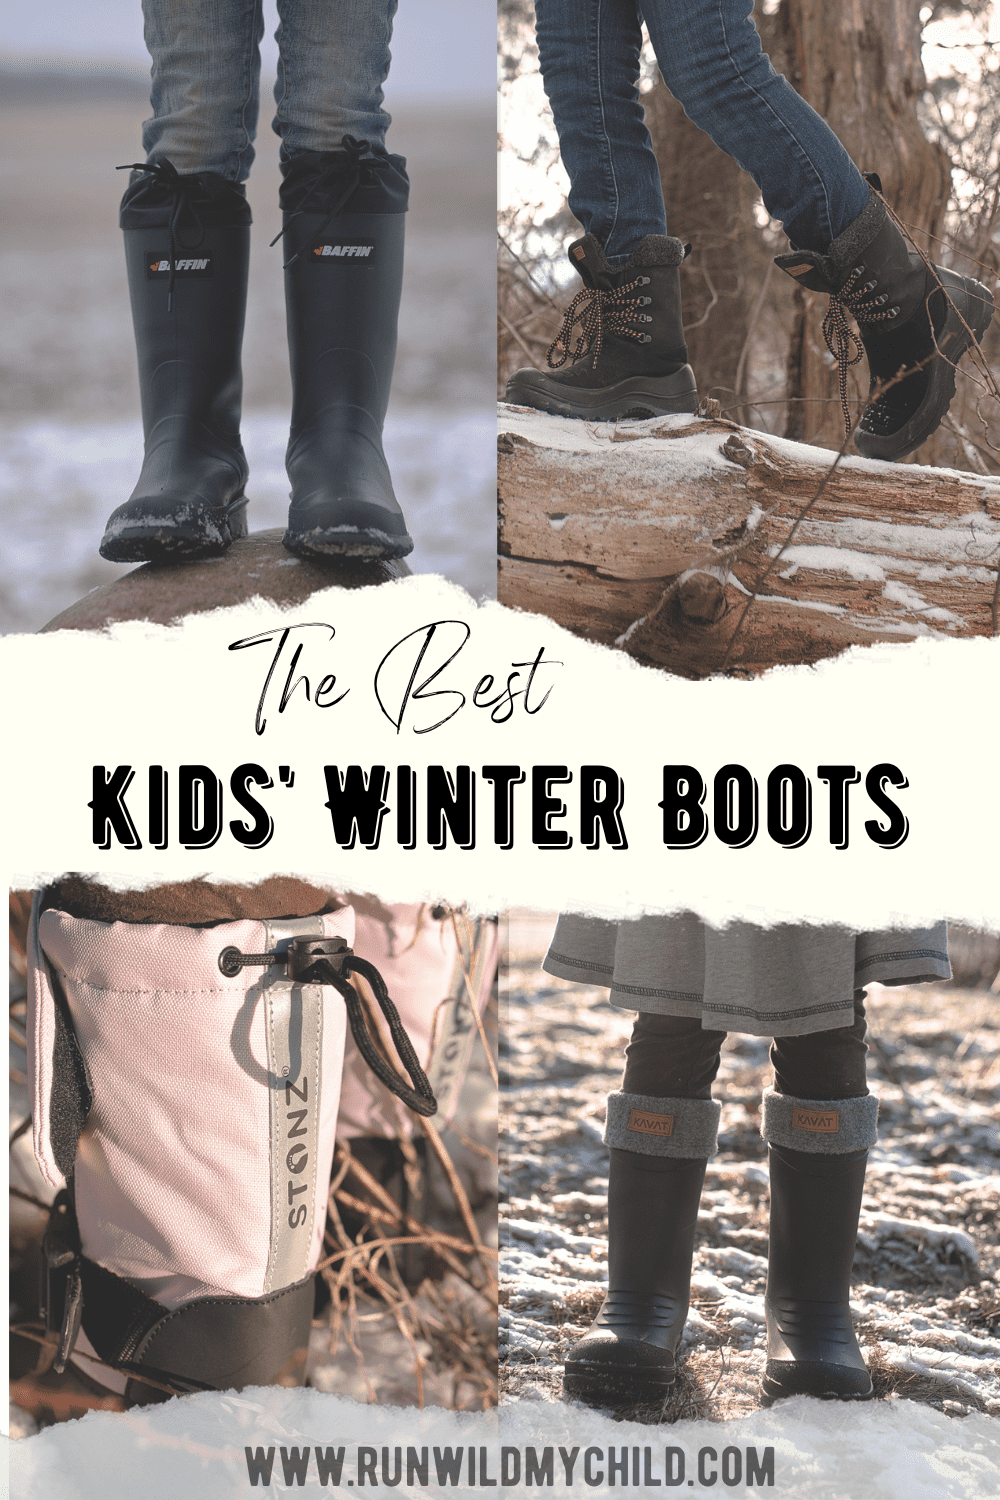 Best Kids' Winter Boots - tried and tested by real kids in real winter conditions